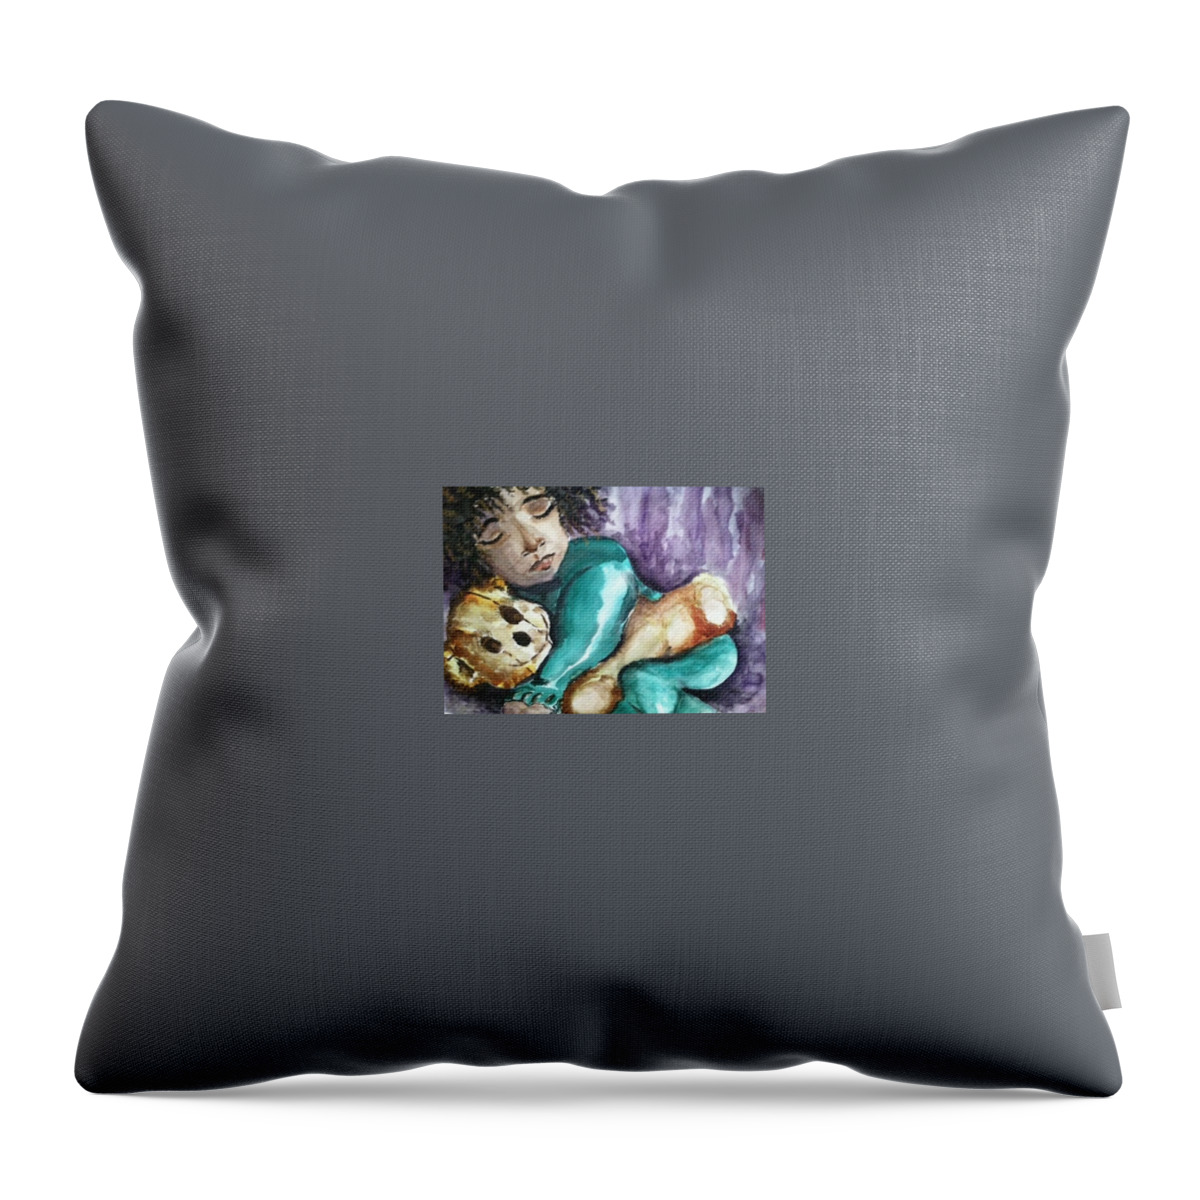  Throw Pillow featuring the painting Naptime by Angie ONeal